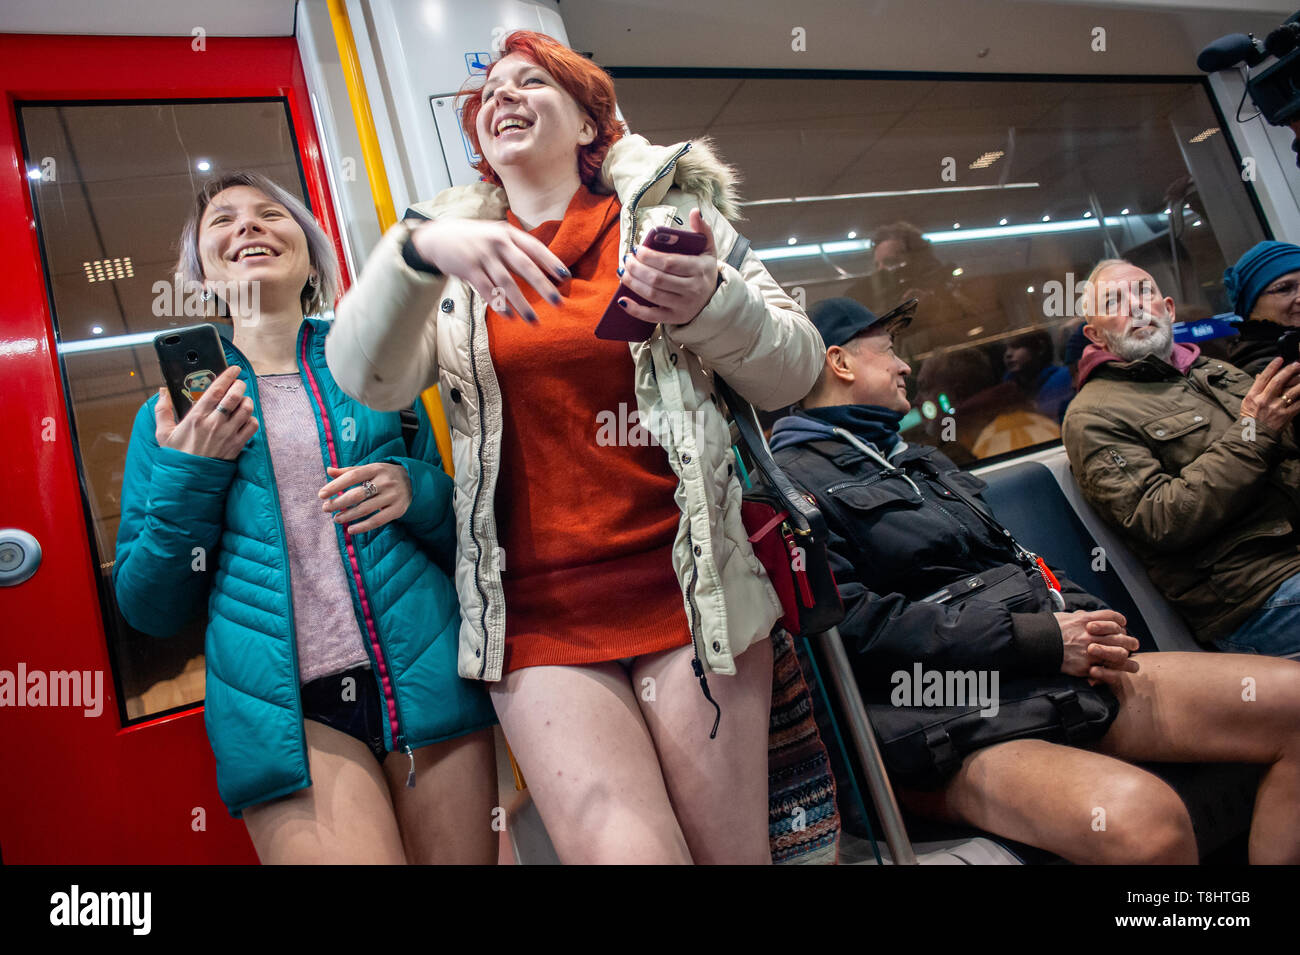 No Pants Subway Ride High Resolution Stock Photography and Images - Alamy